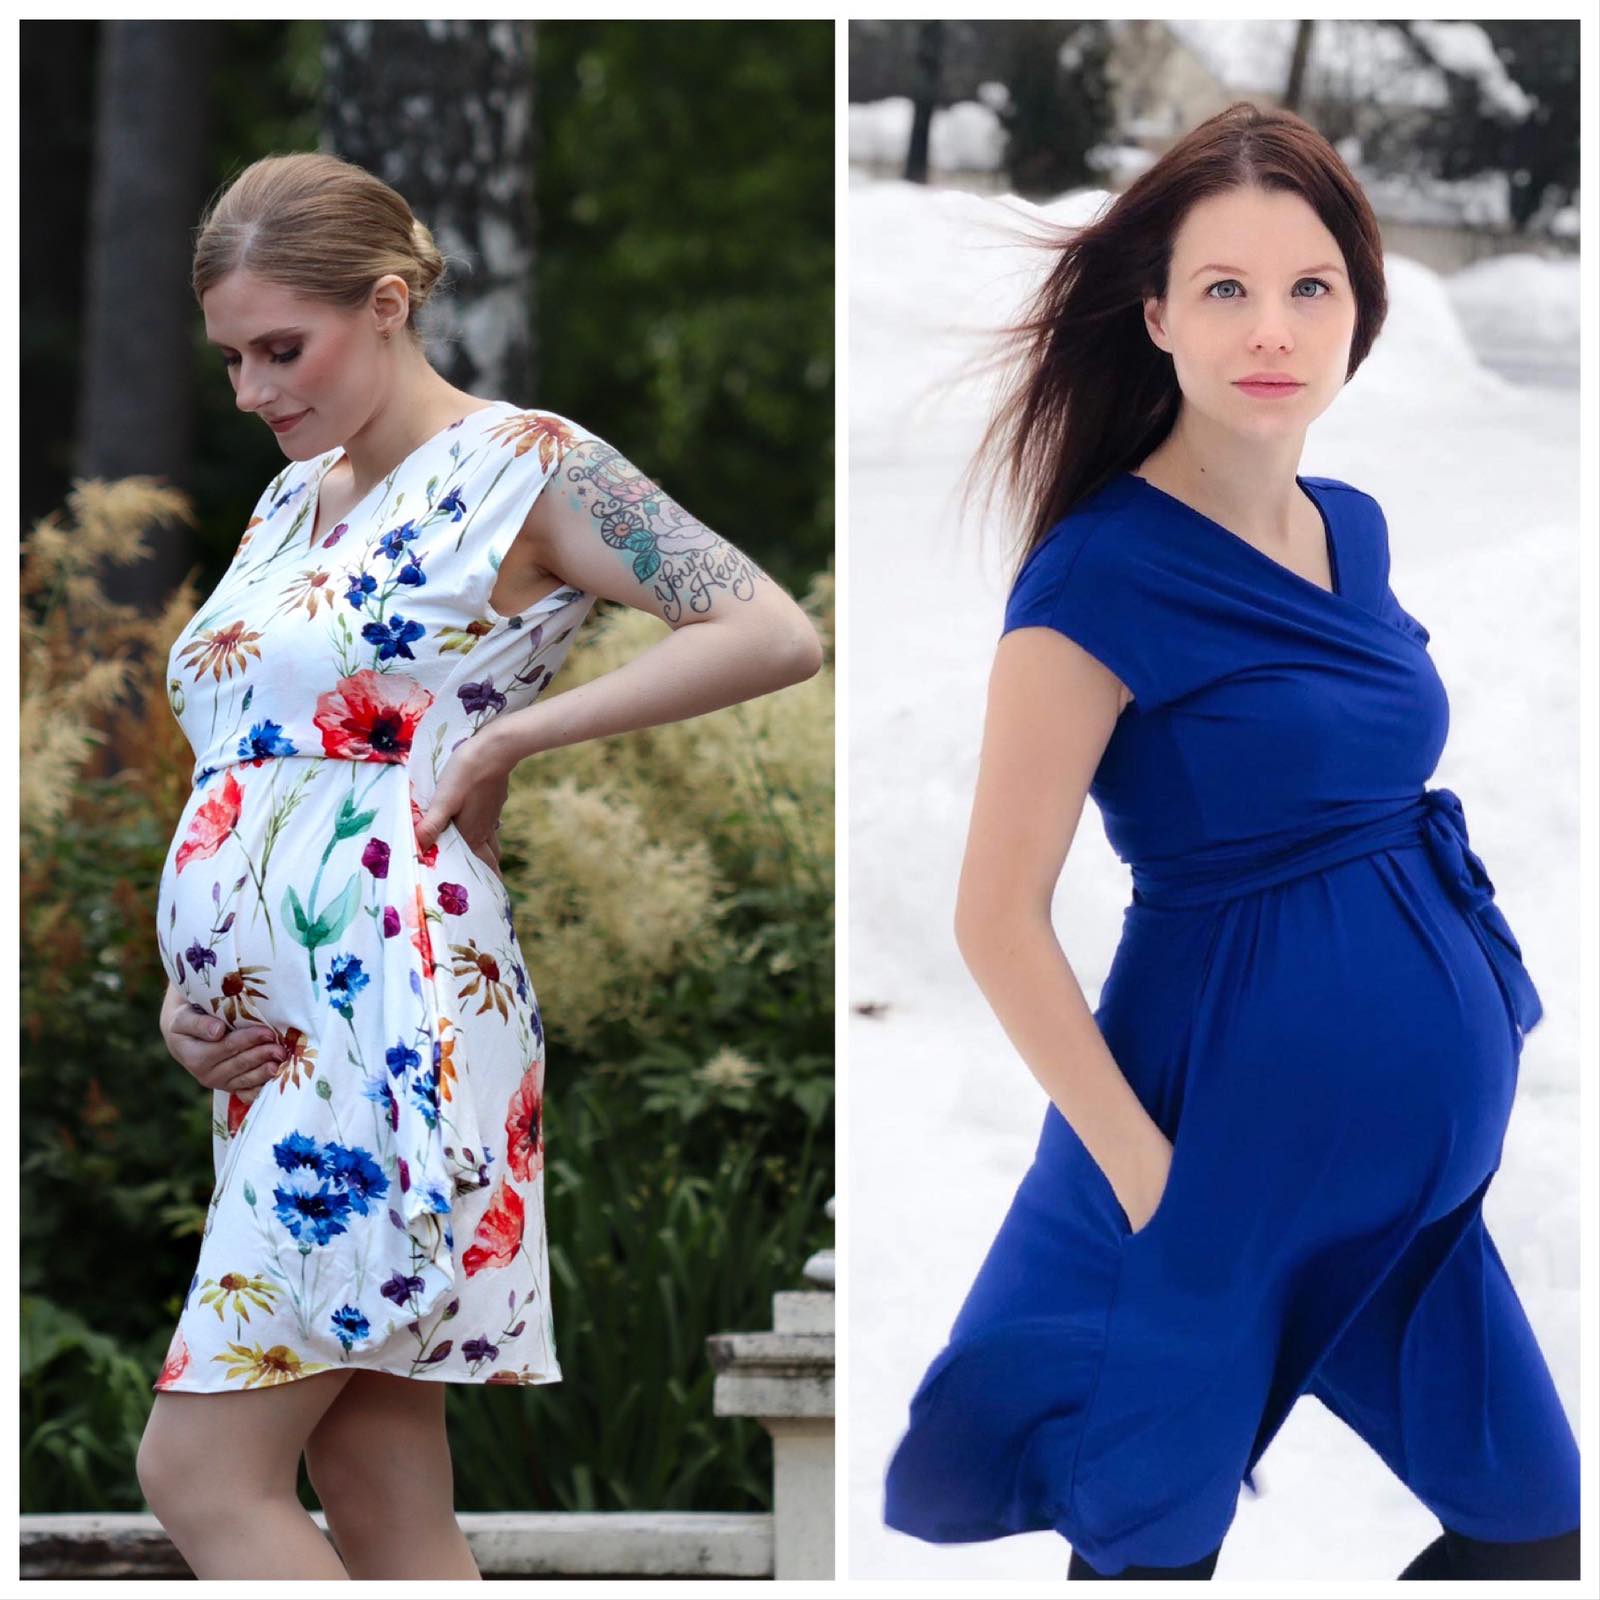 With some innovative twists in shape, VeNove maternity dresses are suitable for breastfeeding (thanks to a hidden nursing panel) and there are many small details that make the projects special. Photo courtesy: VeNove.